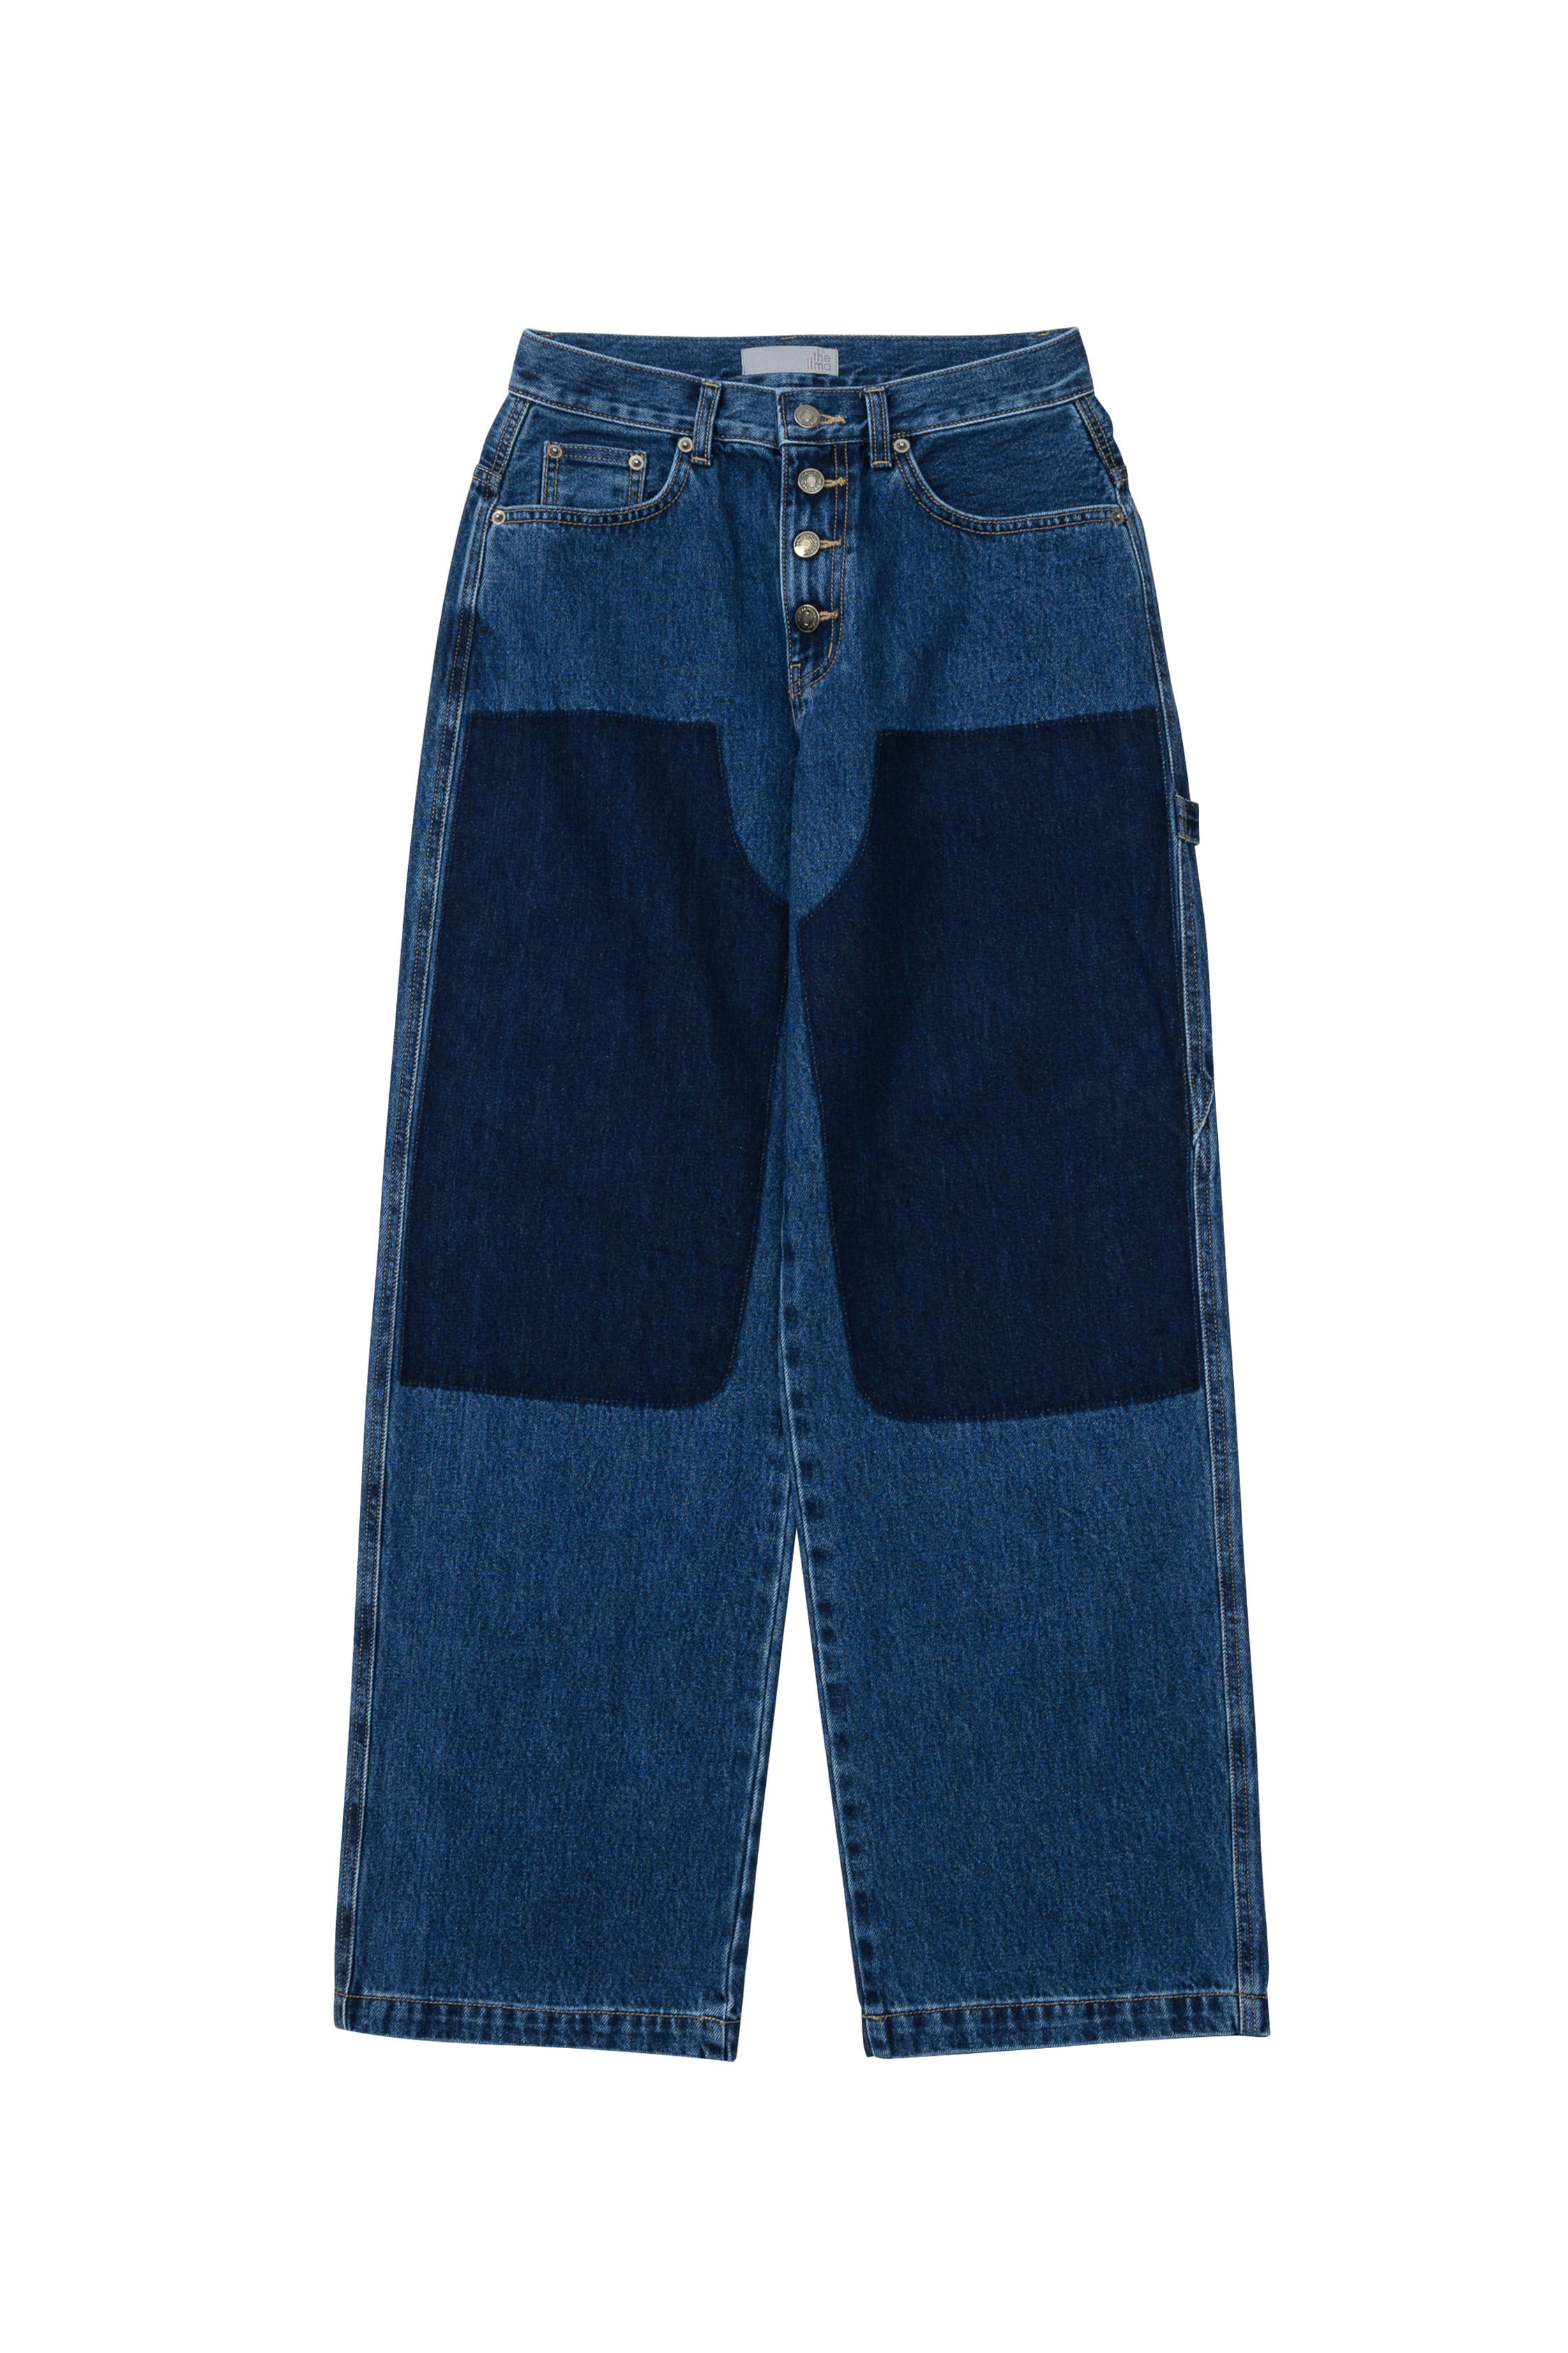 BOXTER PATCH DYED JEANS NAVY